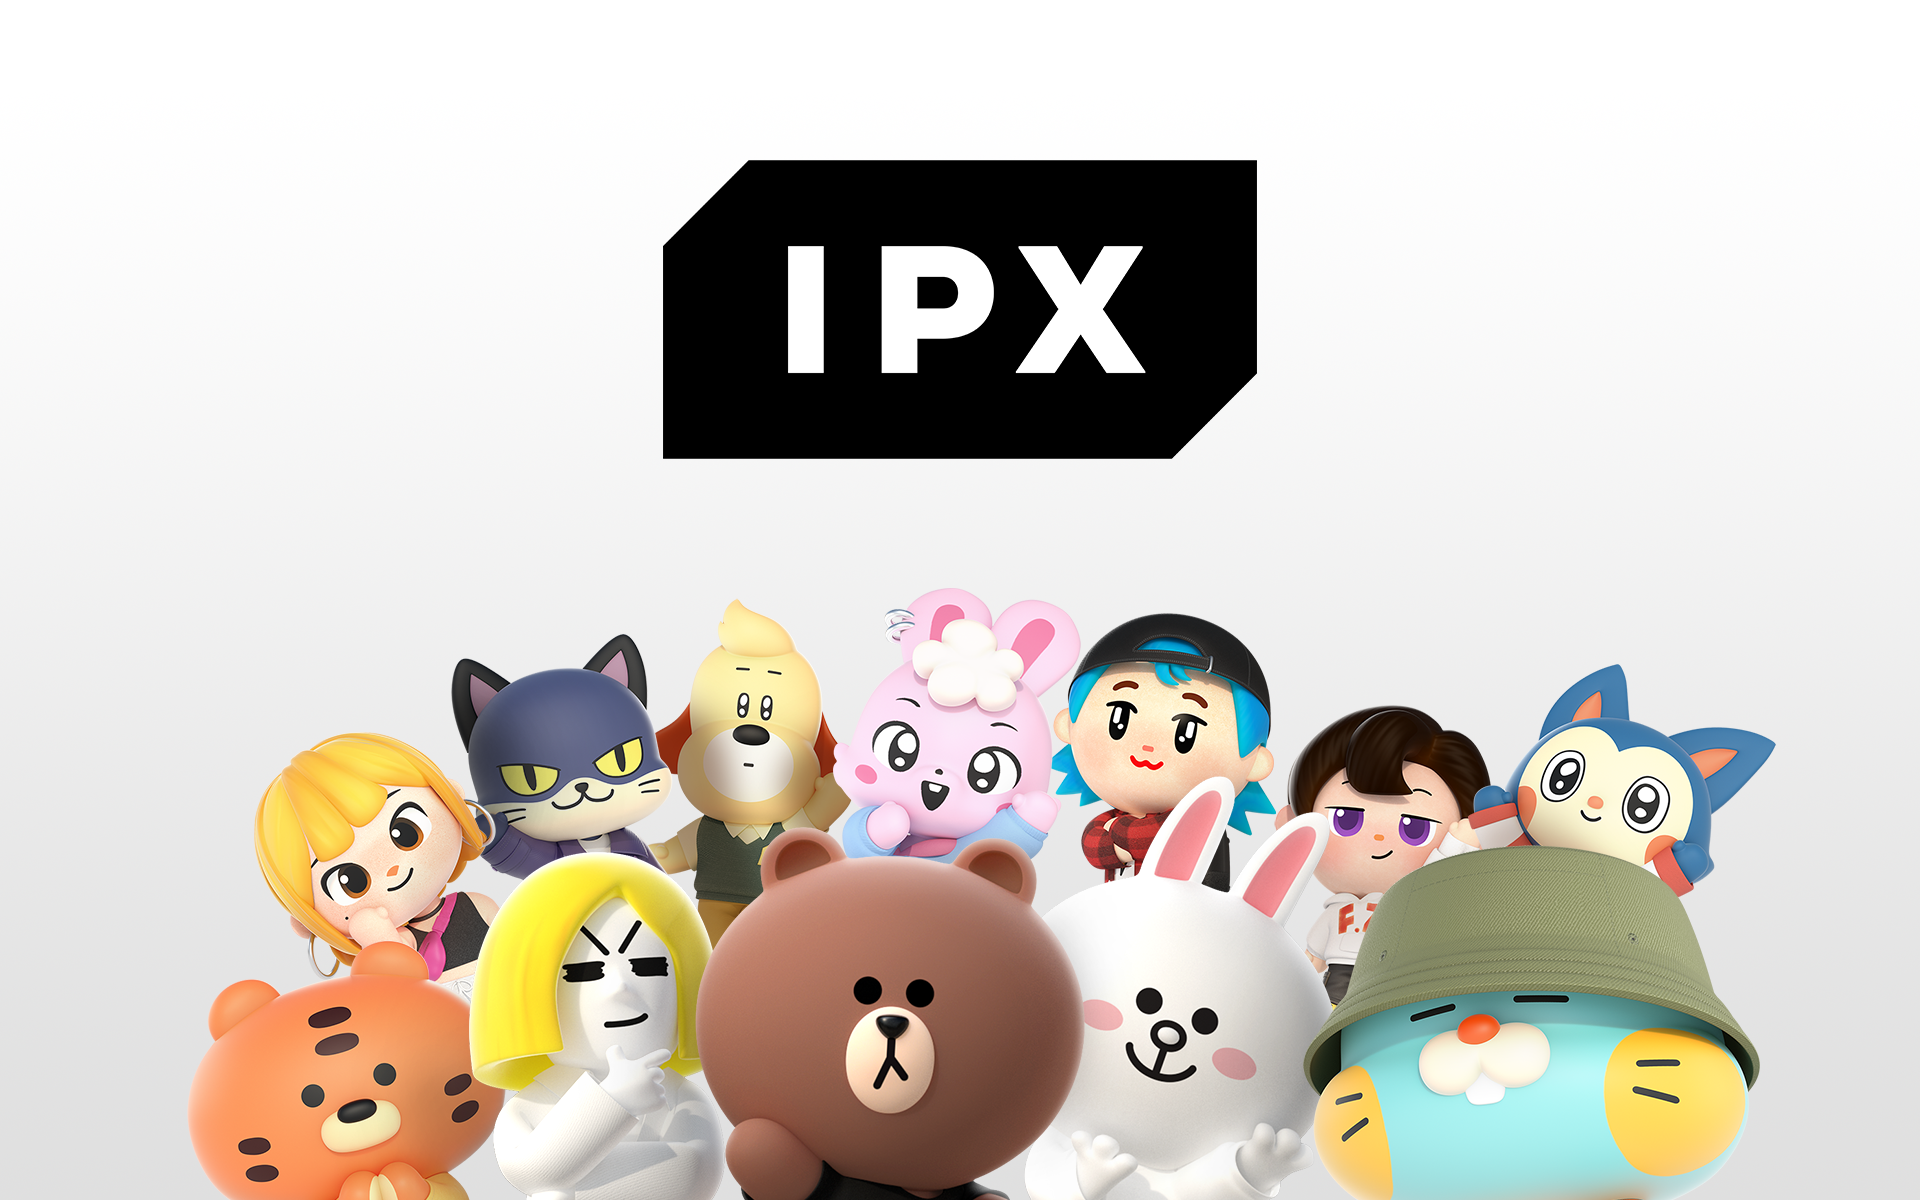 LINE FRIENDS to Change Its Corporate Name to IPX, the